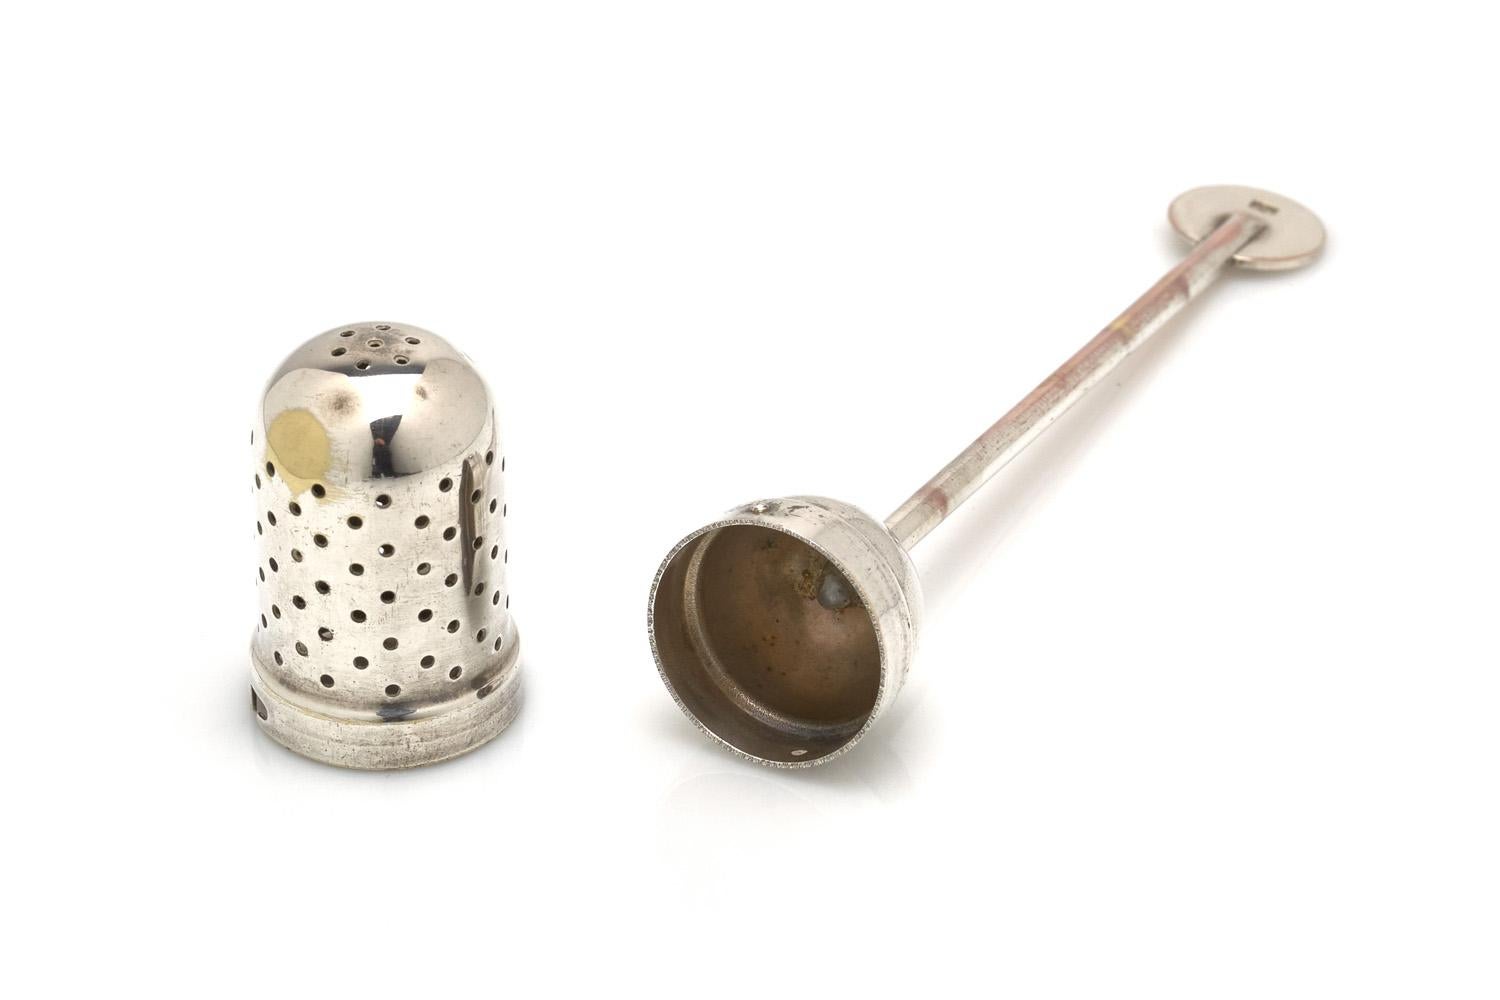 Christian Dell tea infuser, made out of silver plated brass.

1924

Measure: 5.25